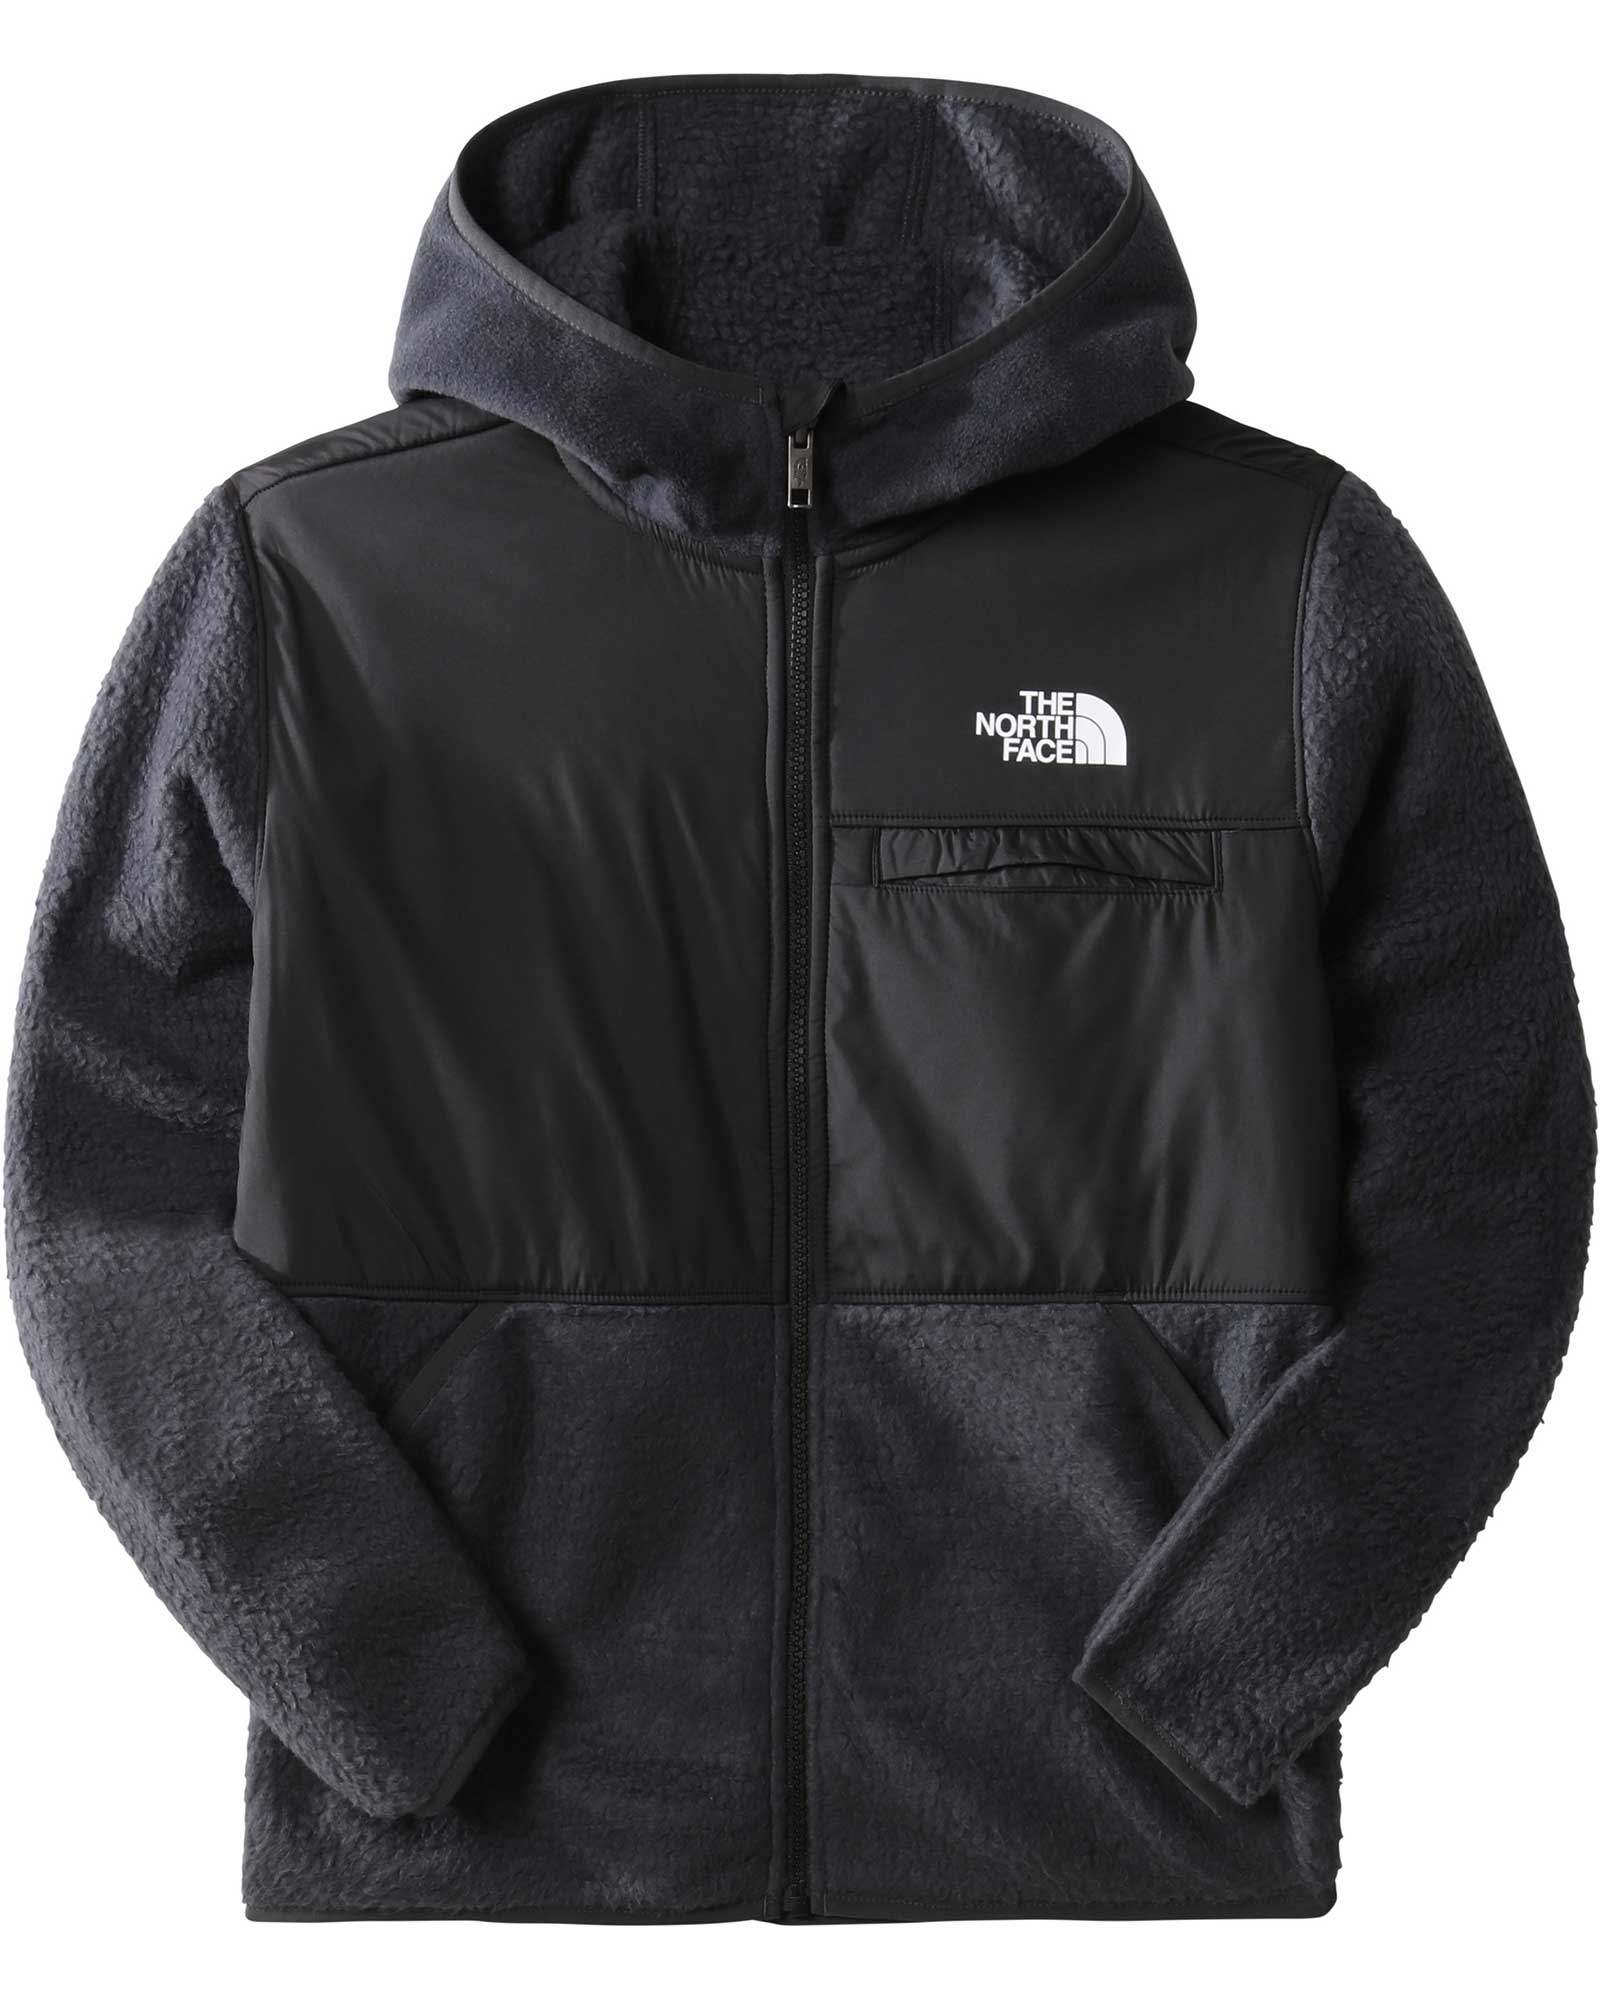 Product image of The North Face Forrest Kids' Fleece Full Zip Hooded Jacket XL